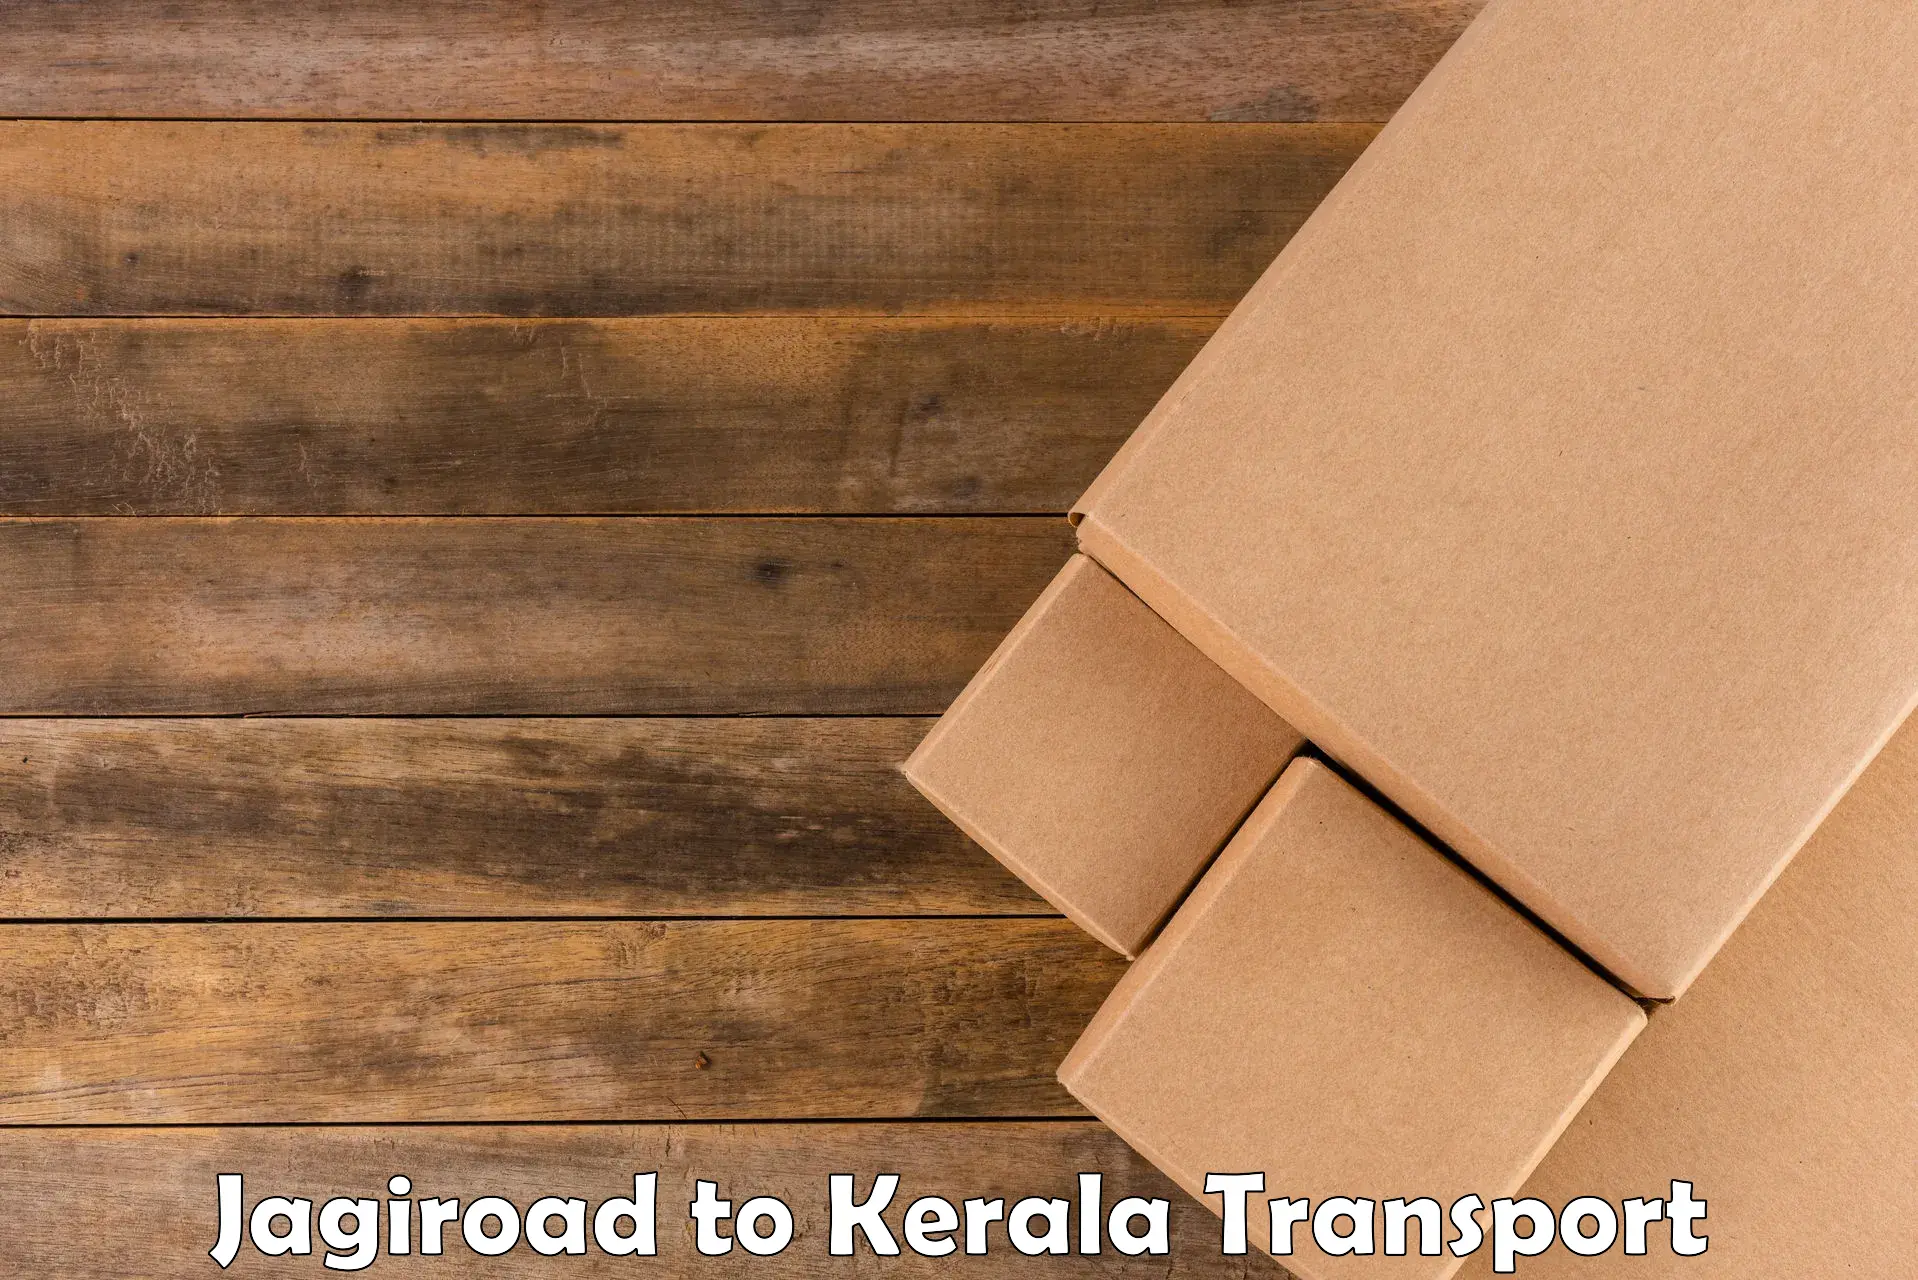 Nearby transport service Jagiroad to Kerala